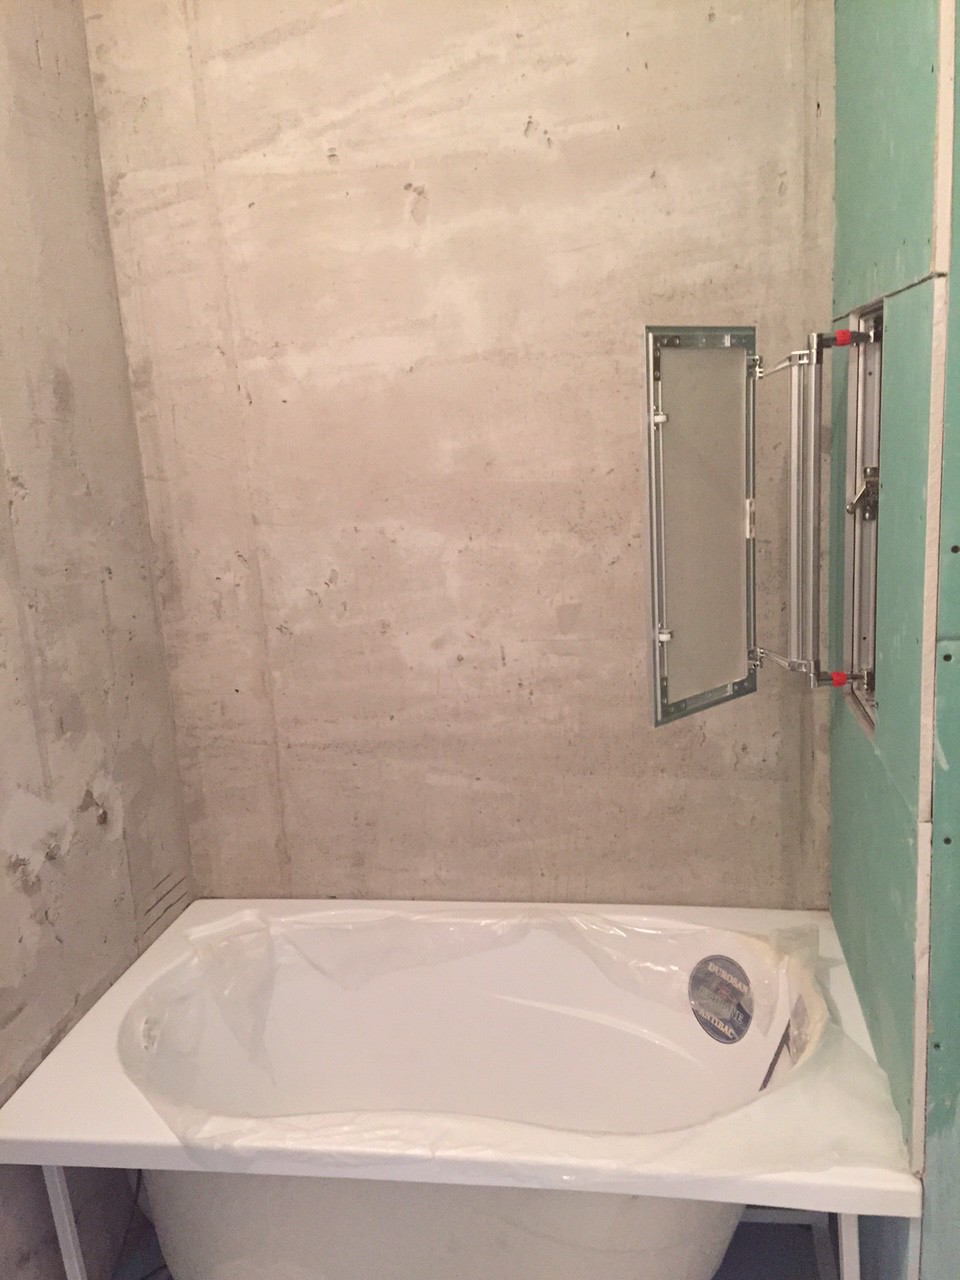 Access Panel With Subway Tiles, How To Make An Access Panel For Bathtub